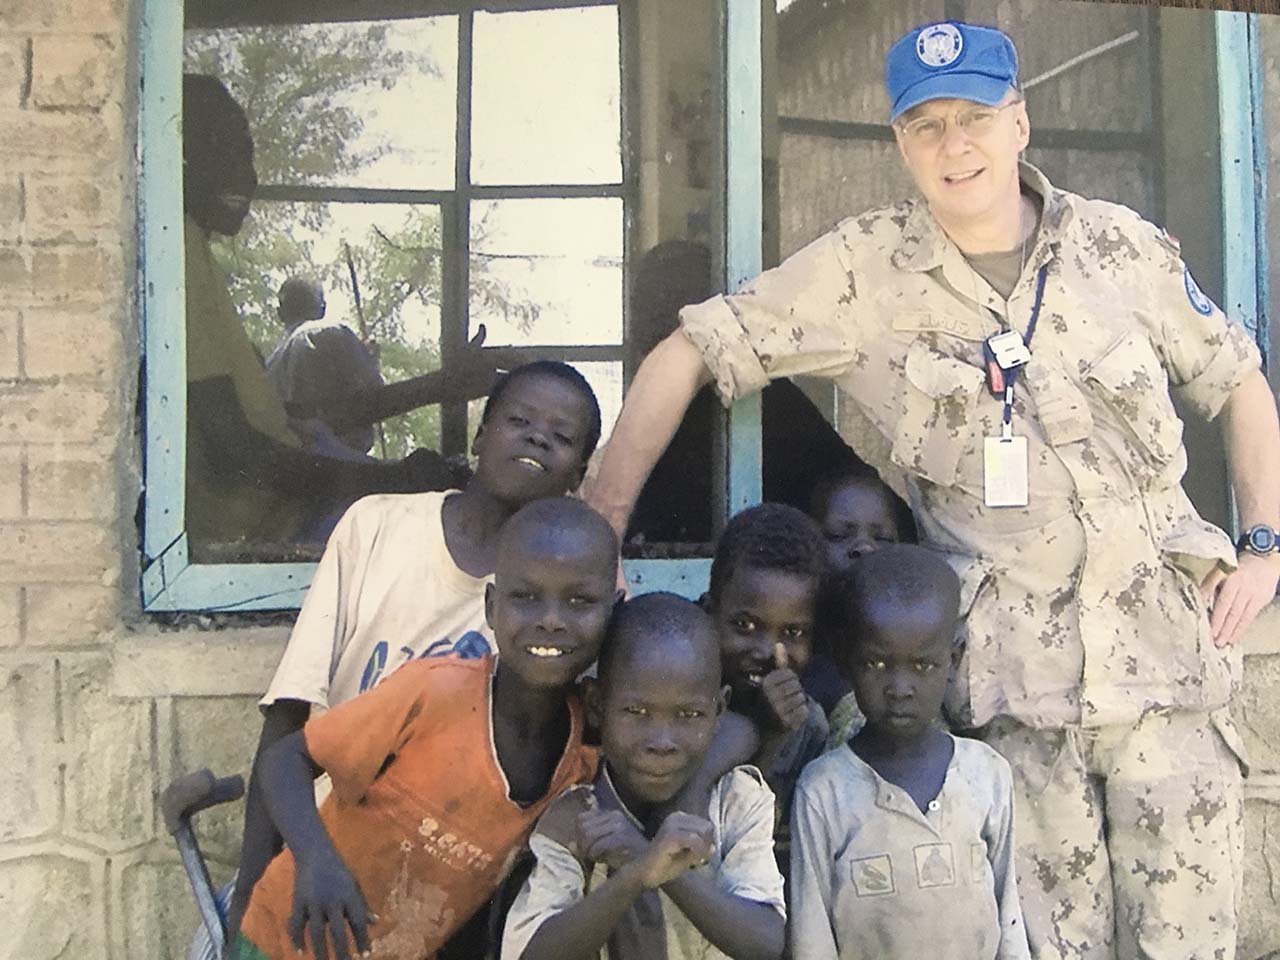 In Sudan in 2005, in addition to his job as a military observer, LCol Goodspeed voluntarily initiated a project to help orphaned children. The photo shows Michael in front of an orphanage in Juba with crippled and undernourished boys. On his own initiative Michael adopted the orphanage and succeeded in getting it registered as a “UN Quick Impact Project.” In war torn Sudan, orphaned boys were considered an unwelcome social burden and were rarely adopted and routinely overlooked by the country’s over-stressed and inadequate social services. Goodspeed organized UN engineers to repair their building and coordinated with NGOs and UN agencies to ensure these children were housed, fed, clothed, given medical care and rudimentary schooling.